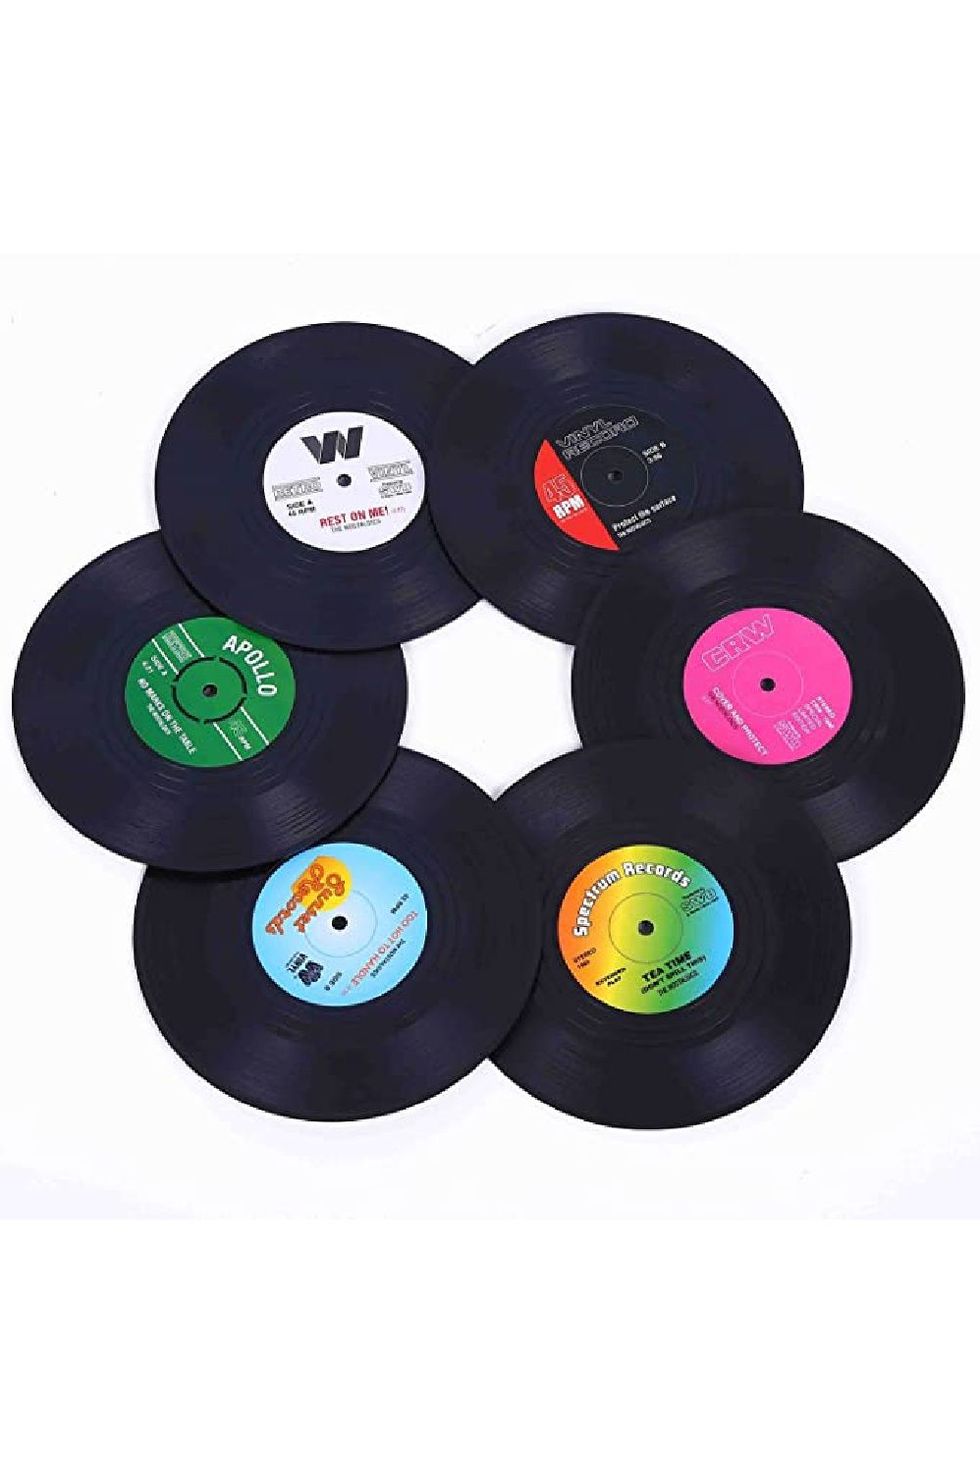 Handmade Products - Record Label